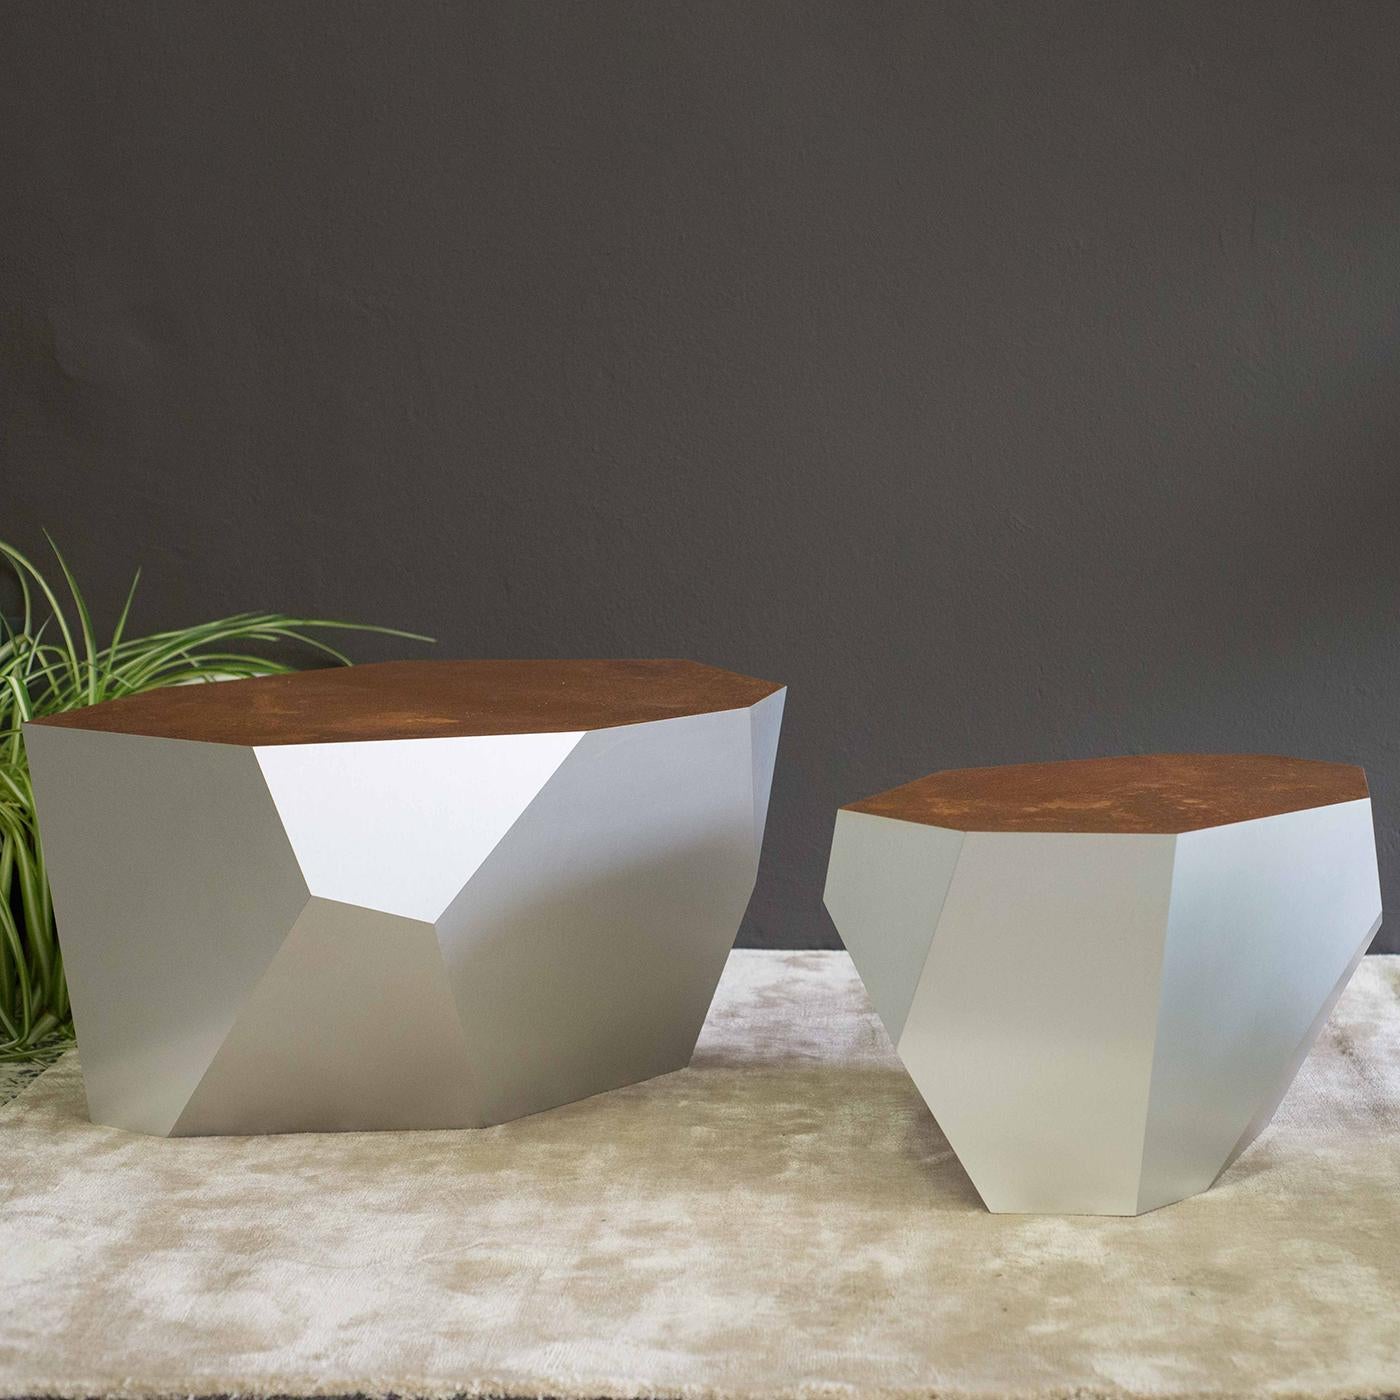 Part of the Rock series, this coffee table's original and stunning design features a form-folded aluminum base with a white anodized finish with a corten steel top, creating a distinctive, weathered appearance. This extraordinary piece will make a